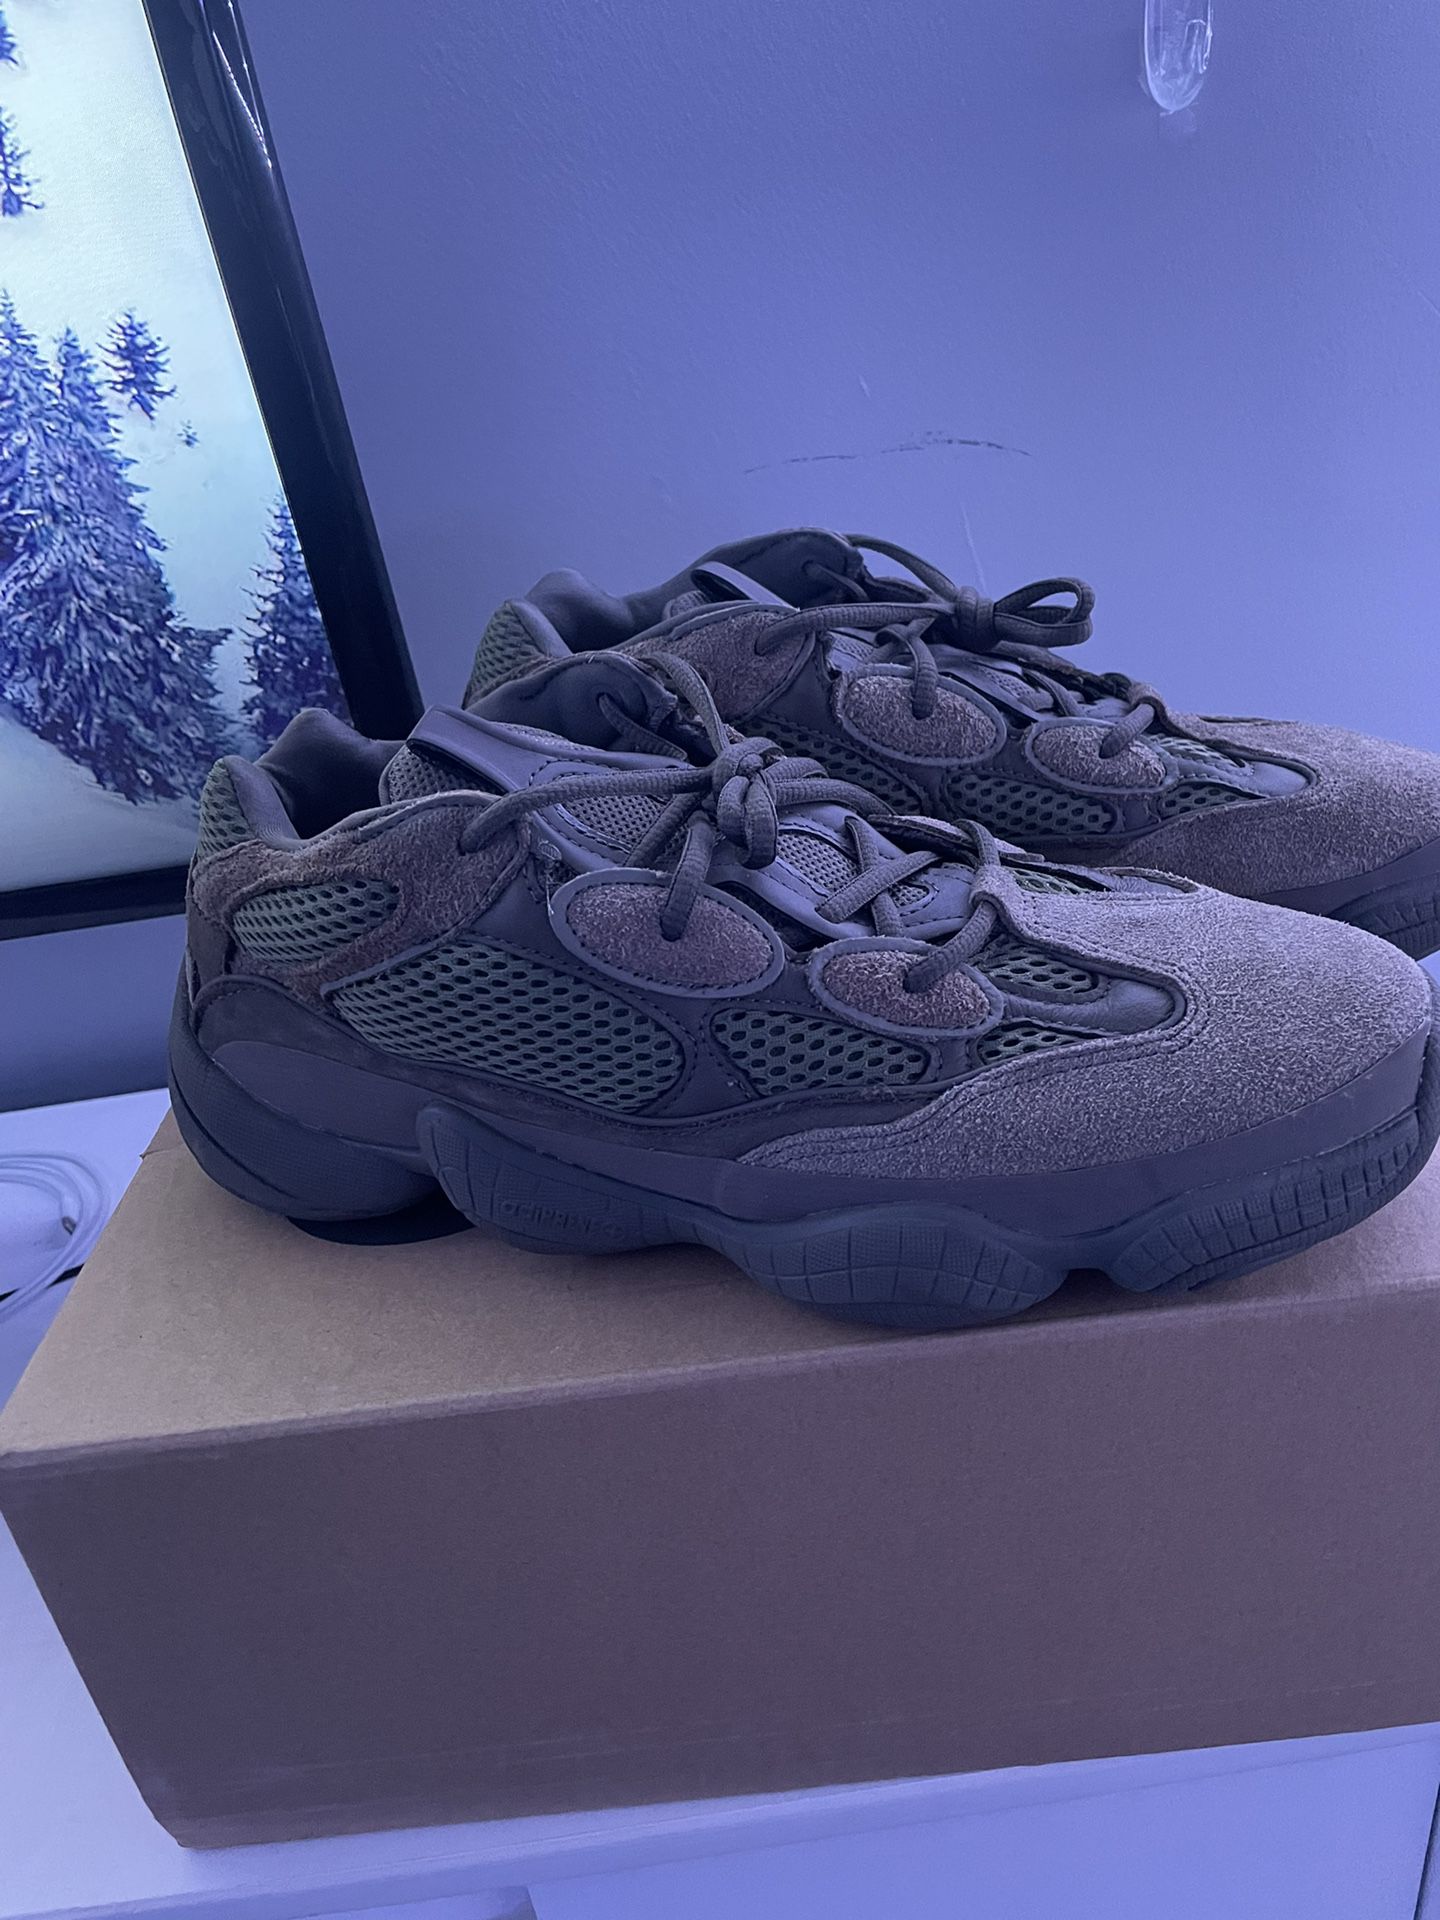 yeezy 500 clay brown